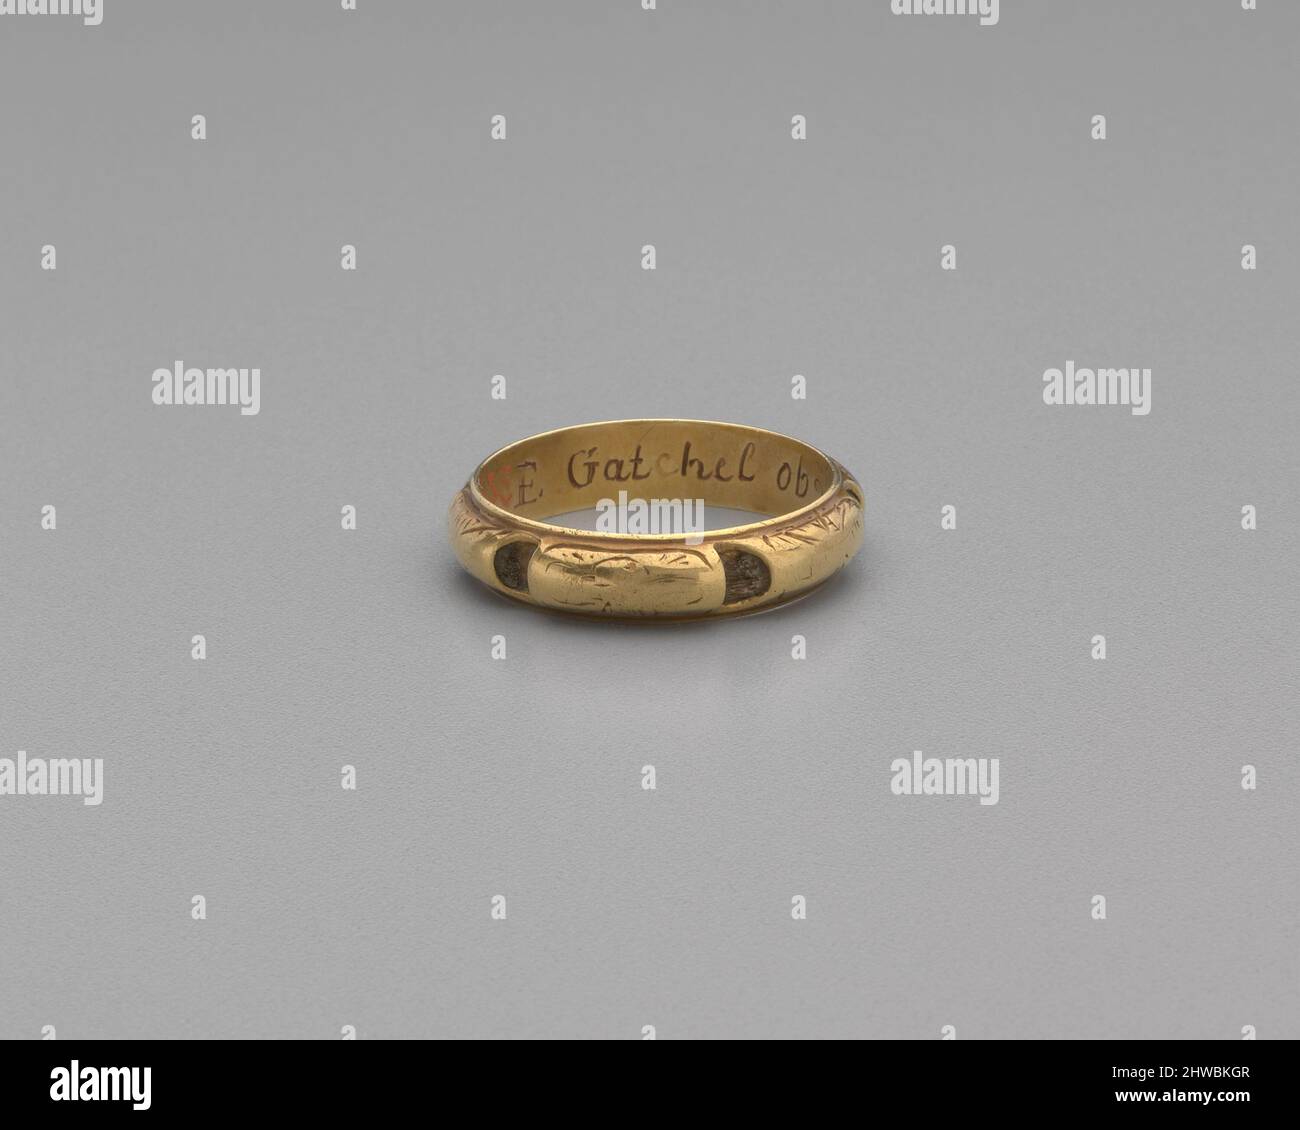 Mourning Ring. Honorand: E. Gatchel, died 1758 Stock Photo